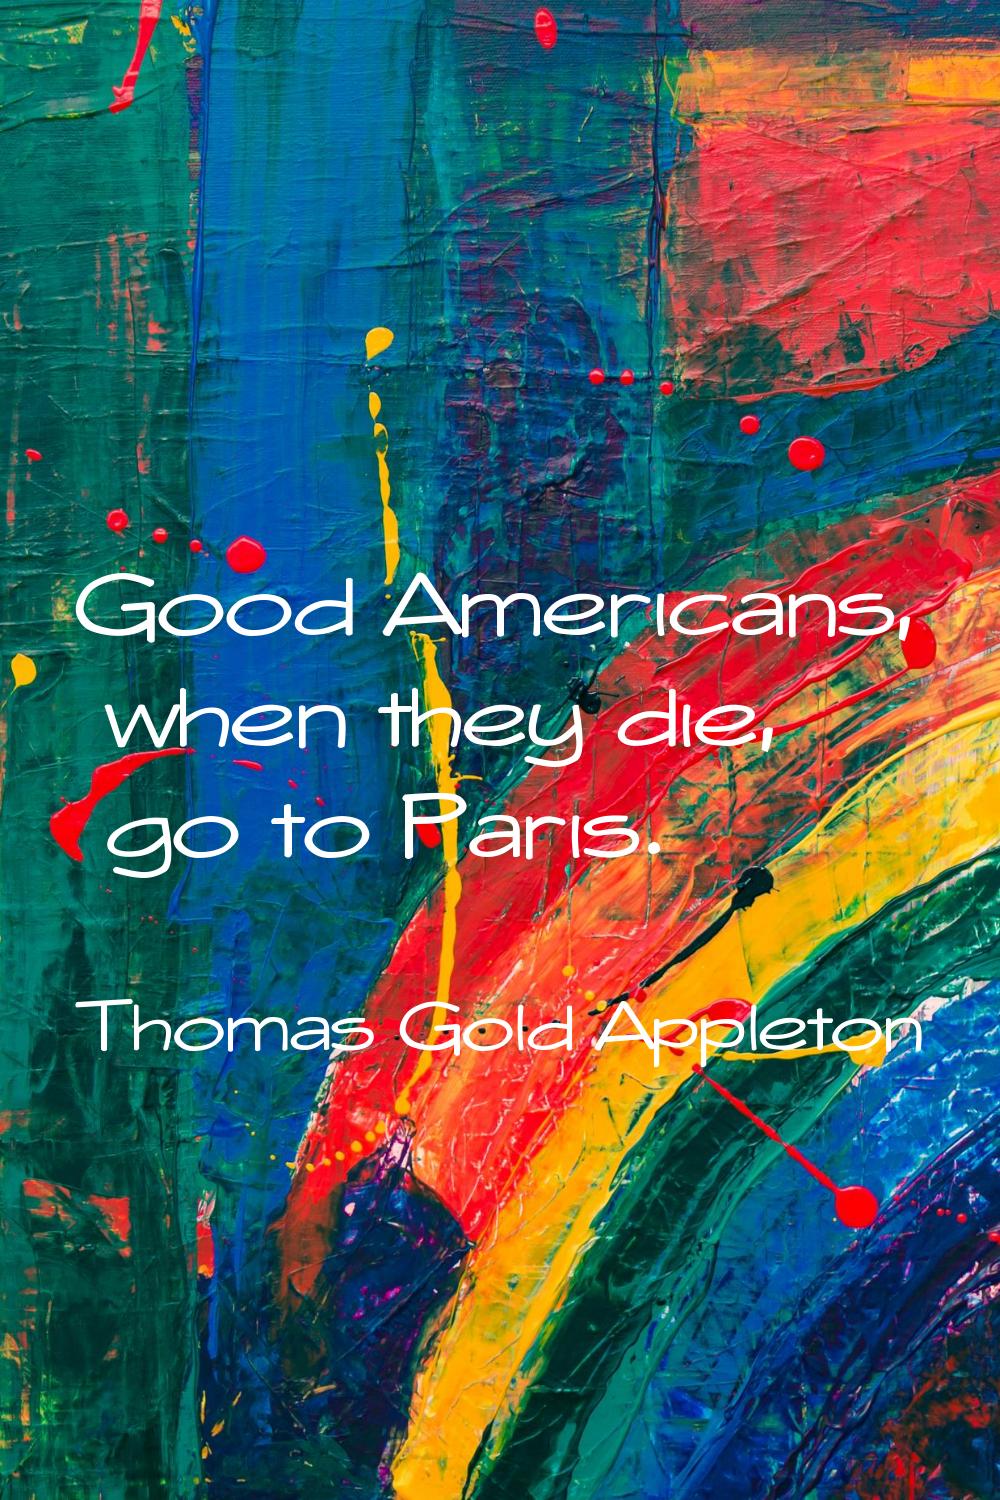 Good Americans, when they die, go to Paris.